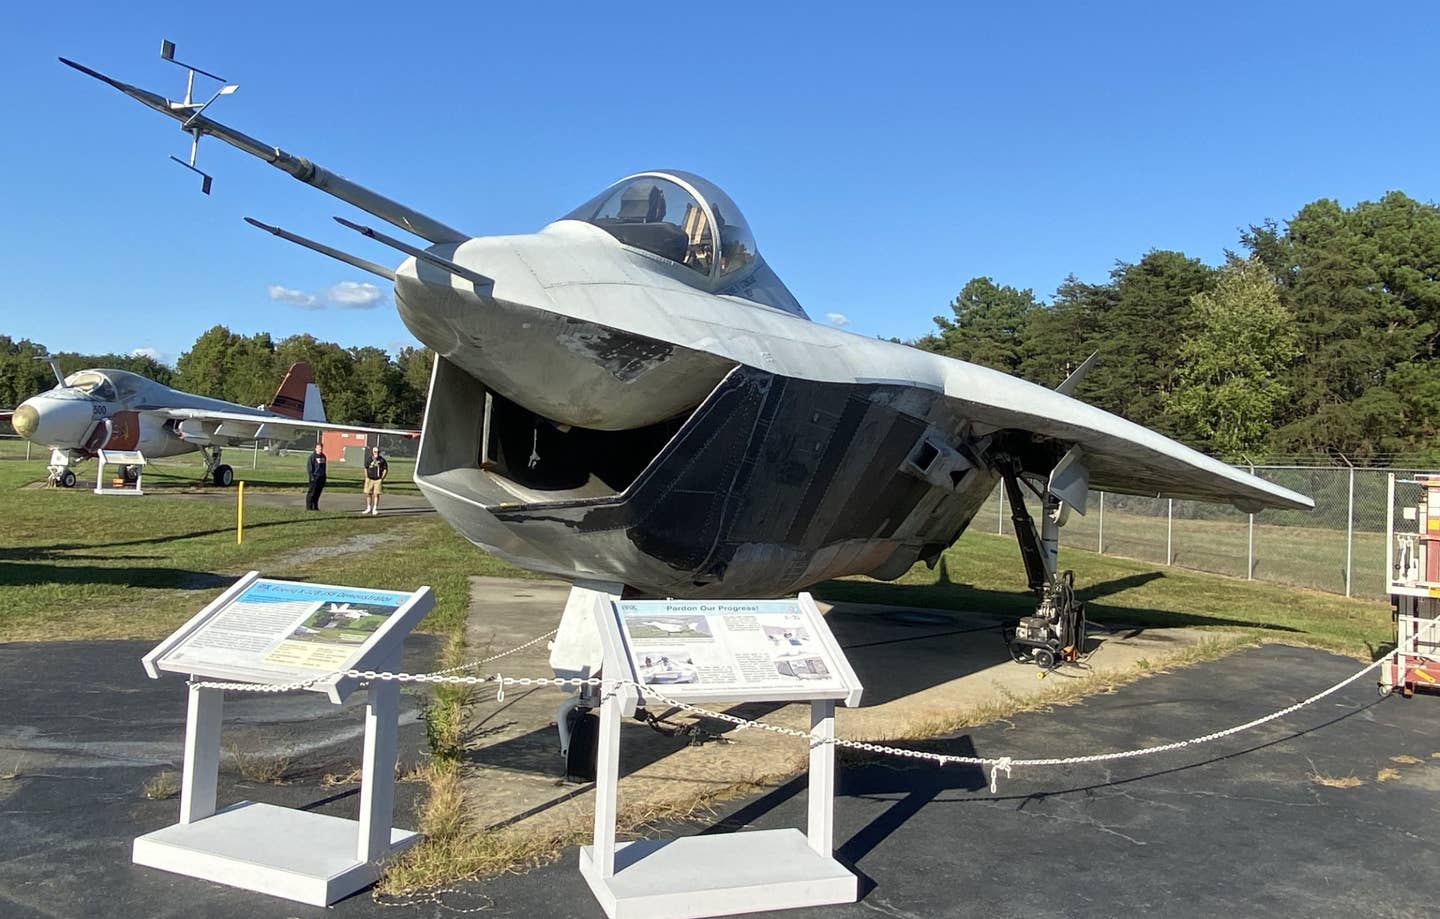 X-32B baking in the sun out at NAS Patuxent River's naval history museum. <a href="https://commons.wikimedia.org/w/index.php?title=User:UnaDriver&amp;action=edit&amp;redlink=1">UnaDriver</a> via Wikicommons